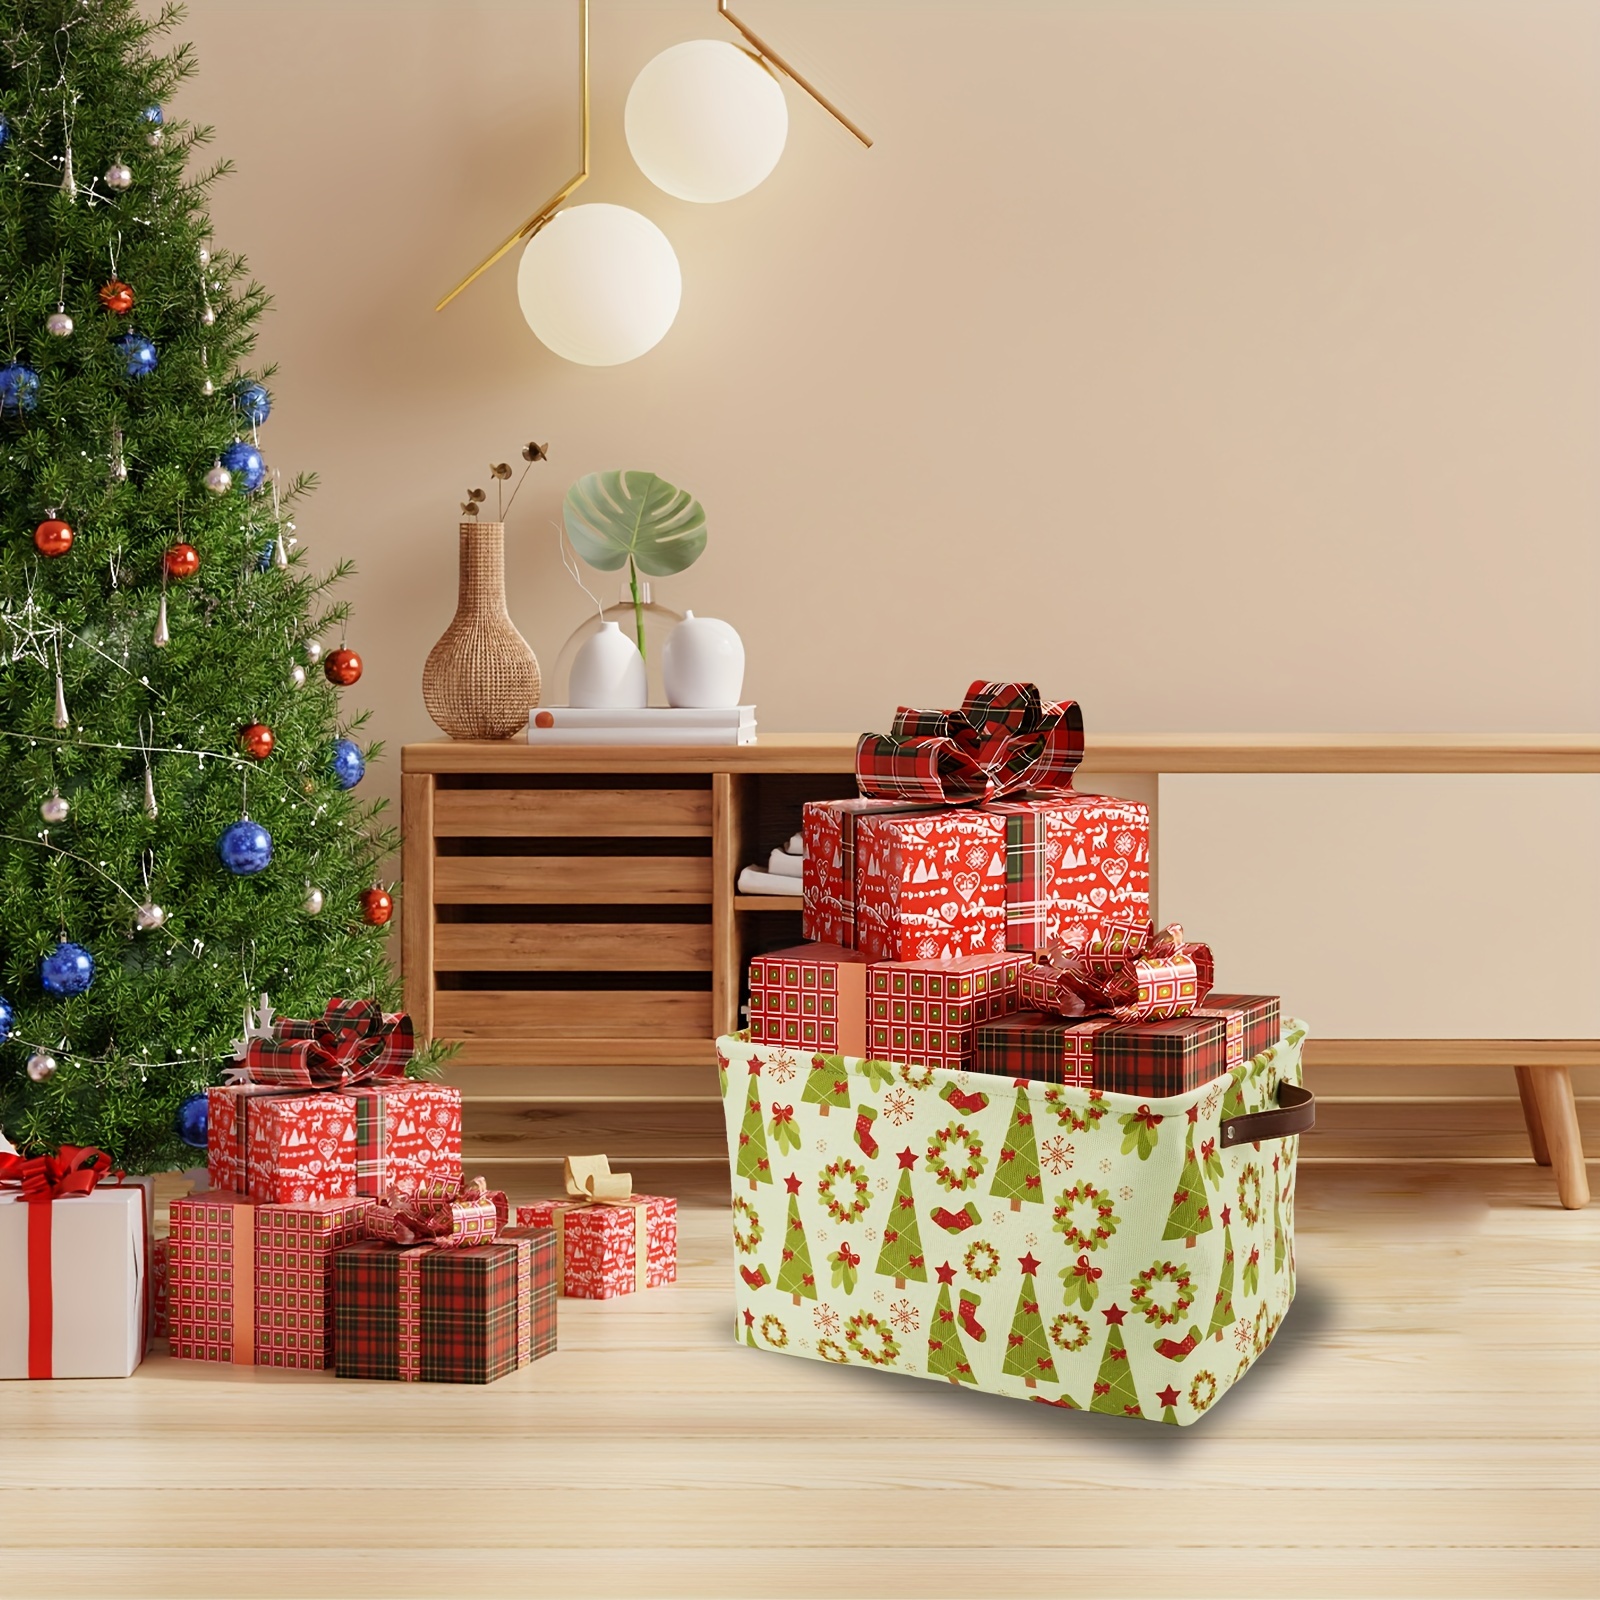 Christmas Gift Kit Ideas - Organize and Decorate Everything